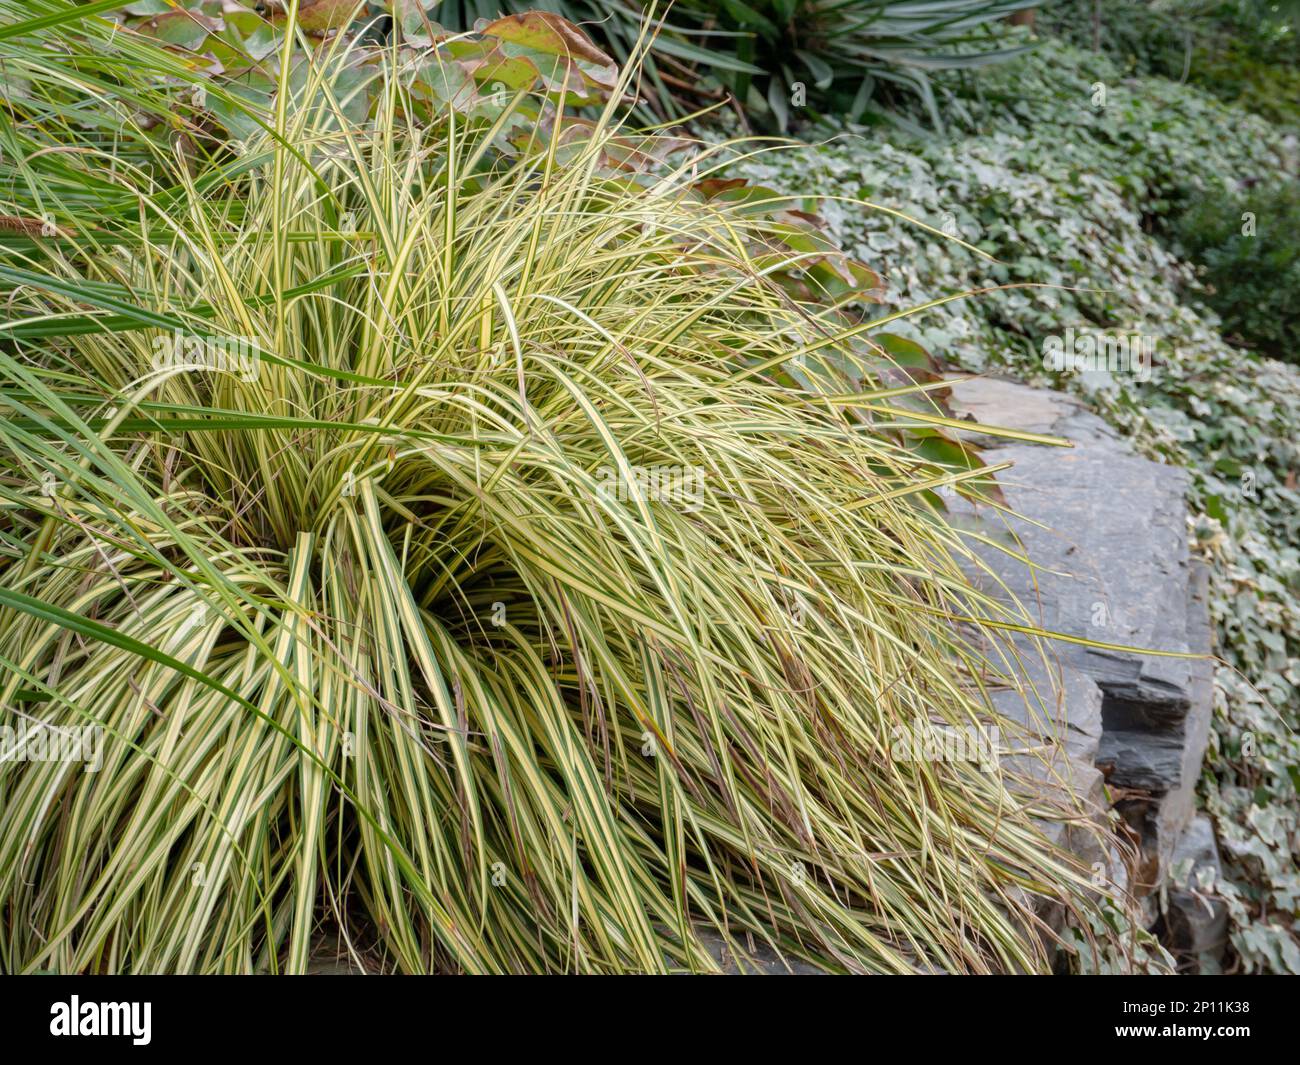 Carex oshimensis or Japanese sedge plant with narrow arching striped green golden foliage in the rockery garden. Ornamental grass. Stock Photo